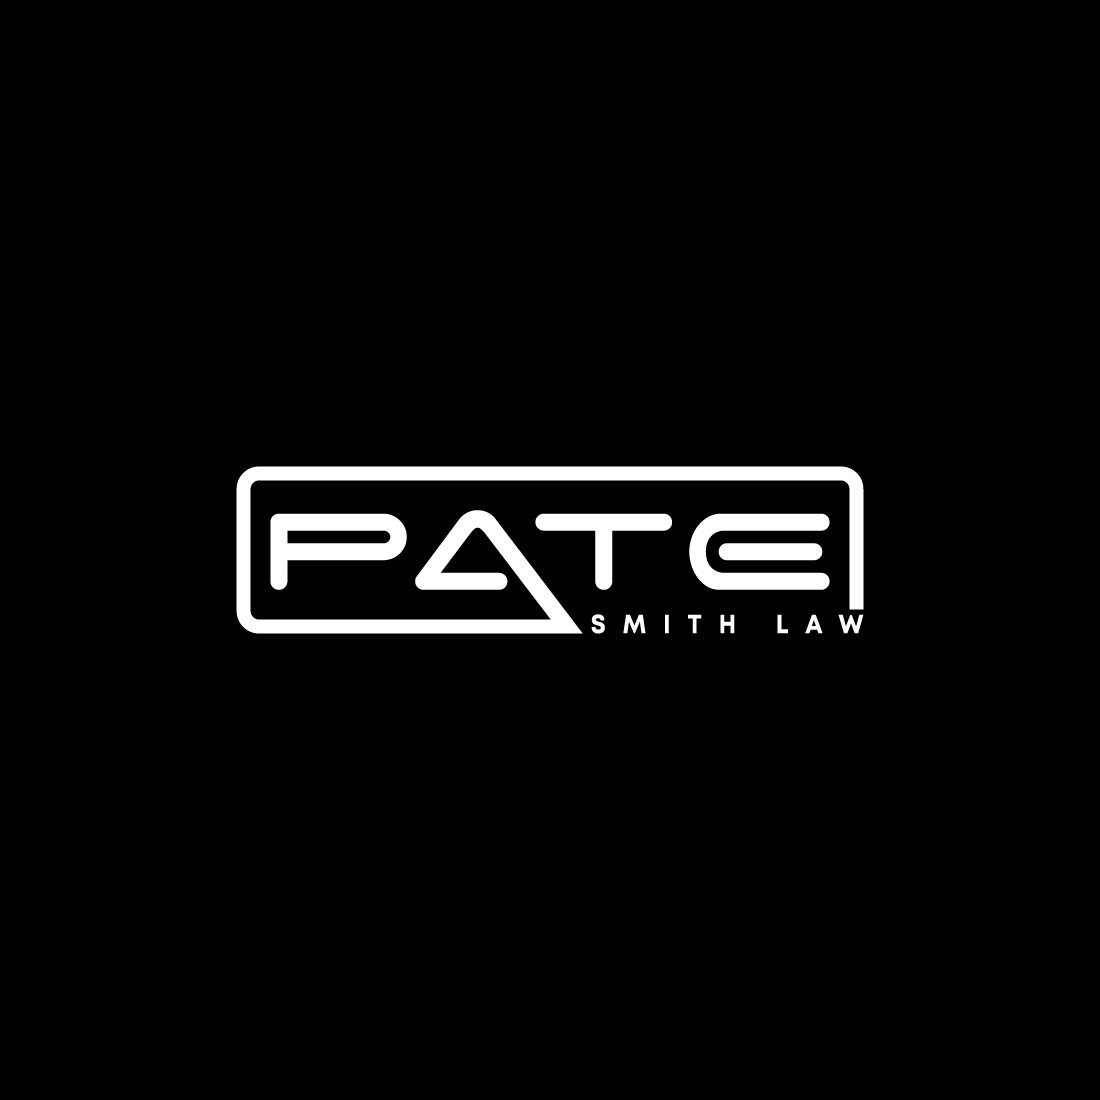 Pate logo preview image.